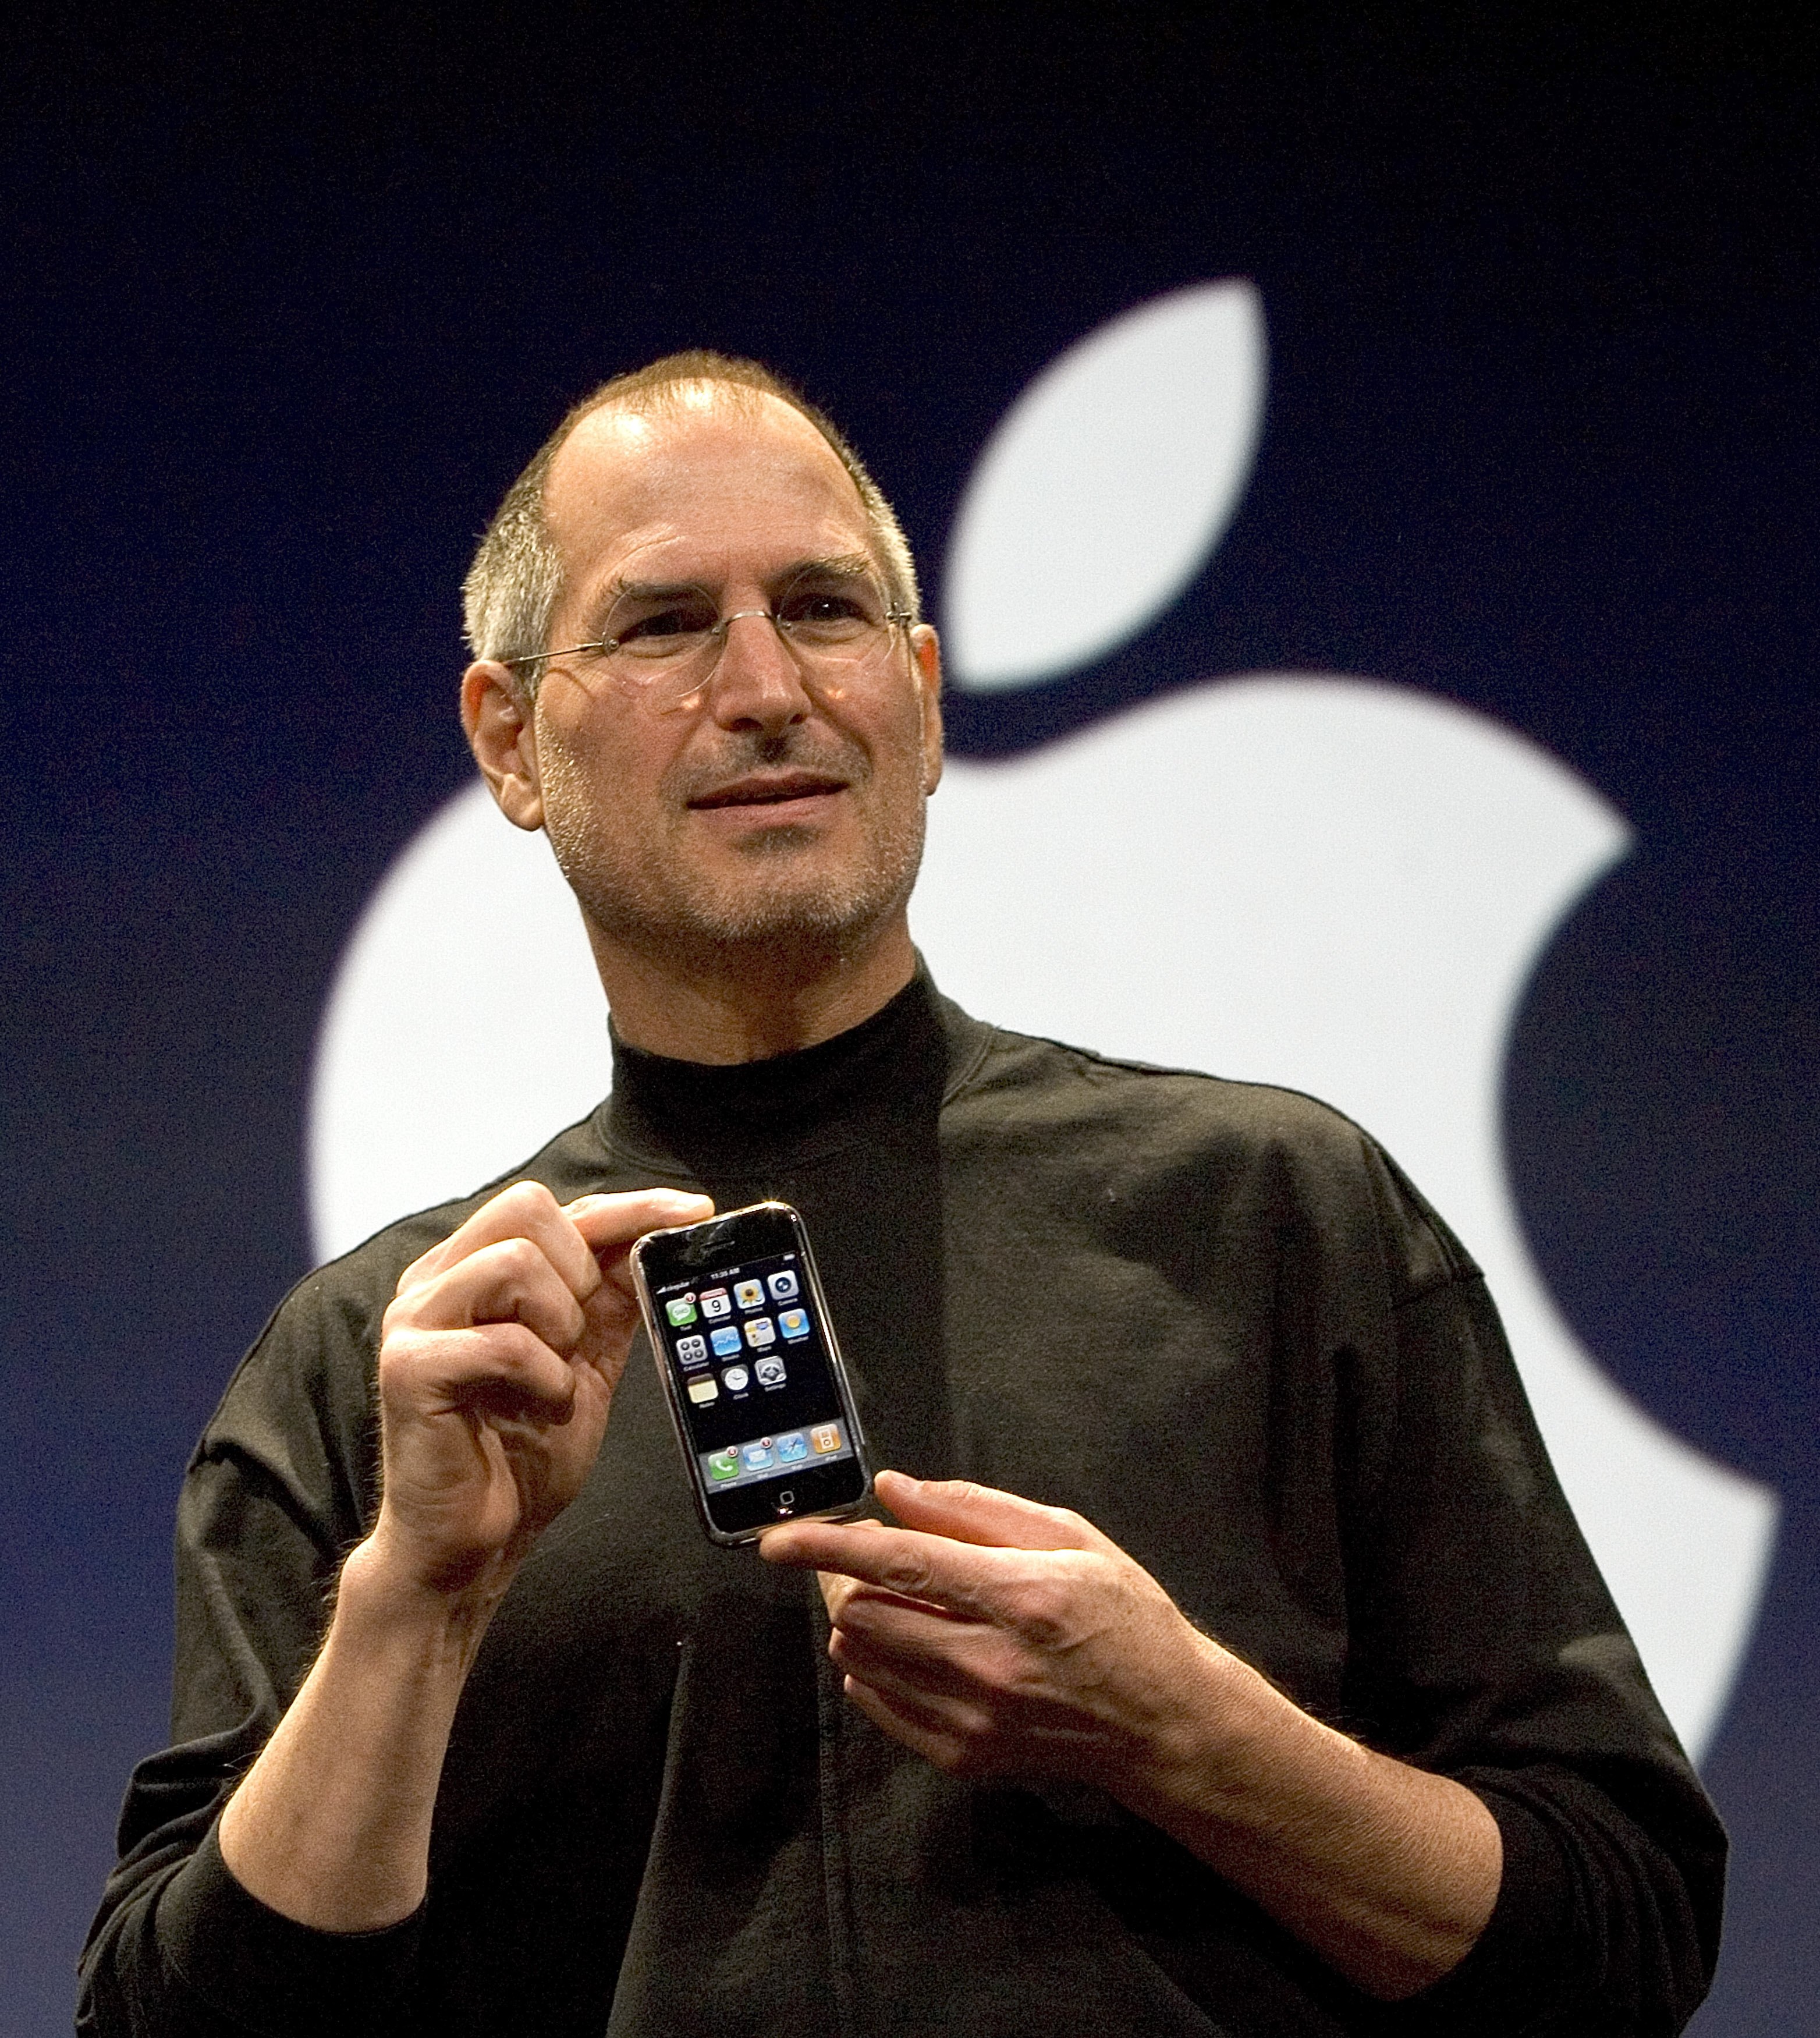 Apple CEO Steve Jobs holds up the new iPhone that was introduced at Macworld in San Francisco on Jan. 9, 2007 (David Paul Morris—Getty Images)